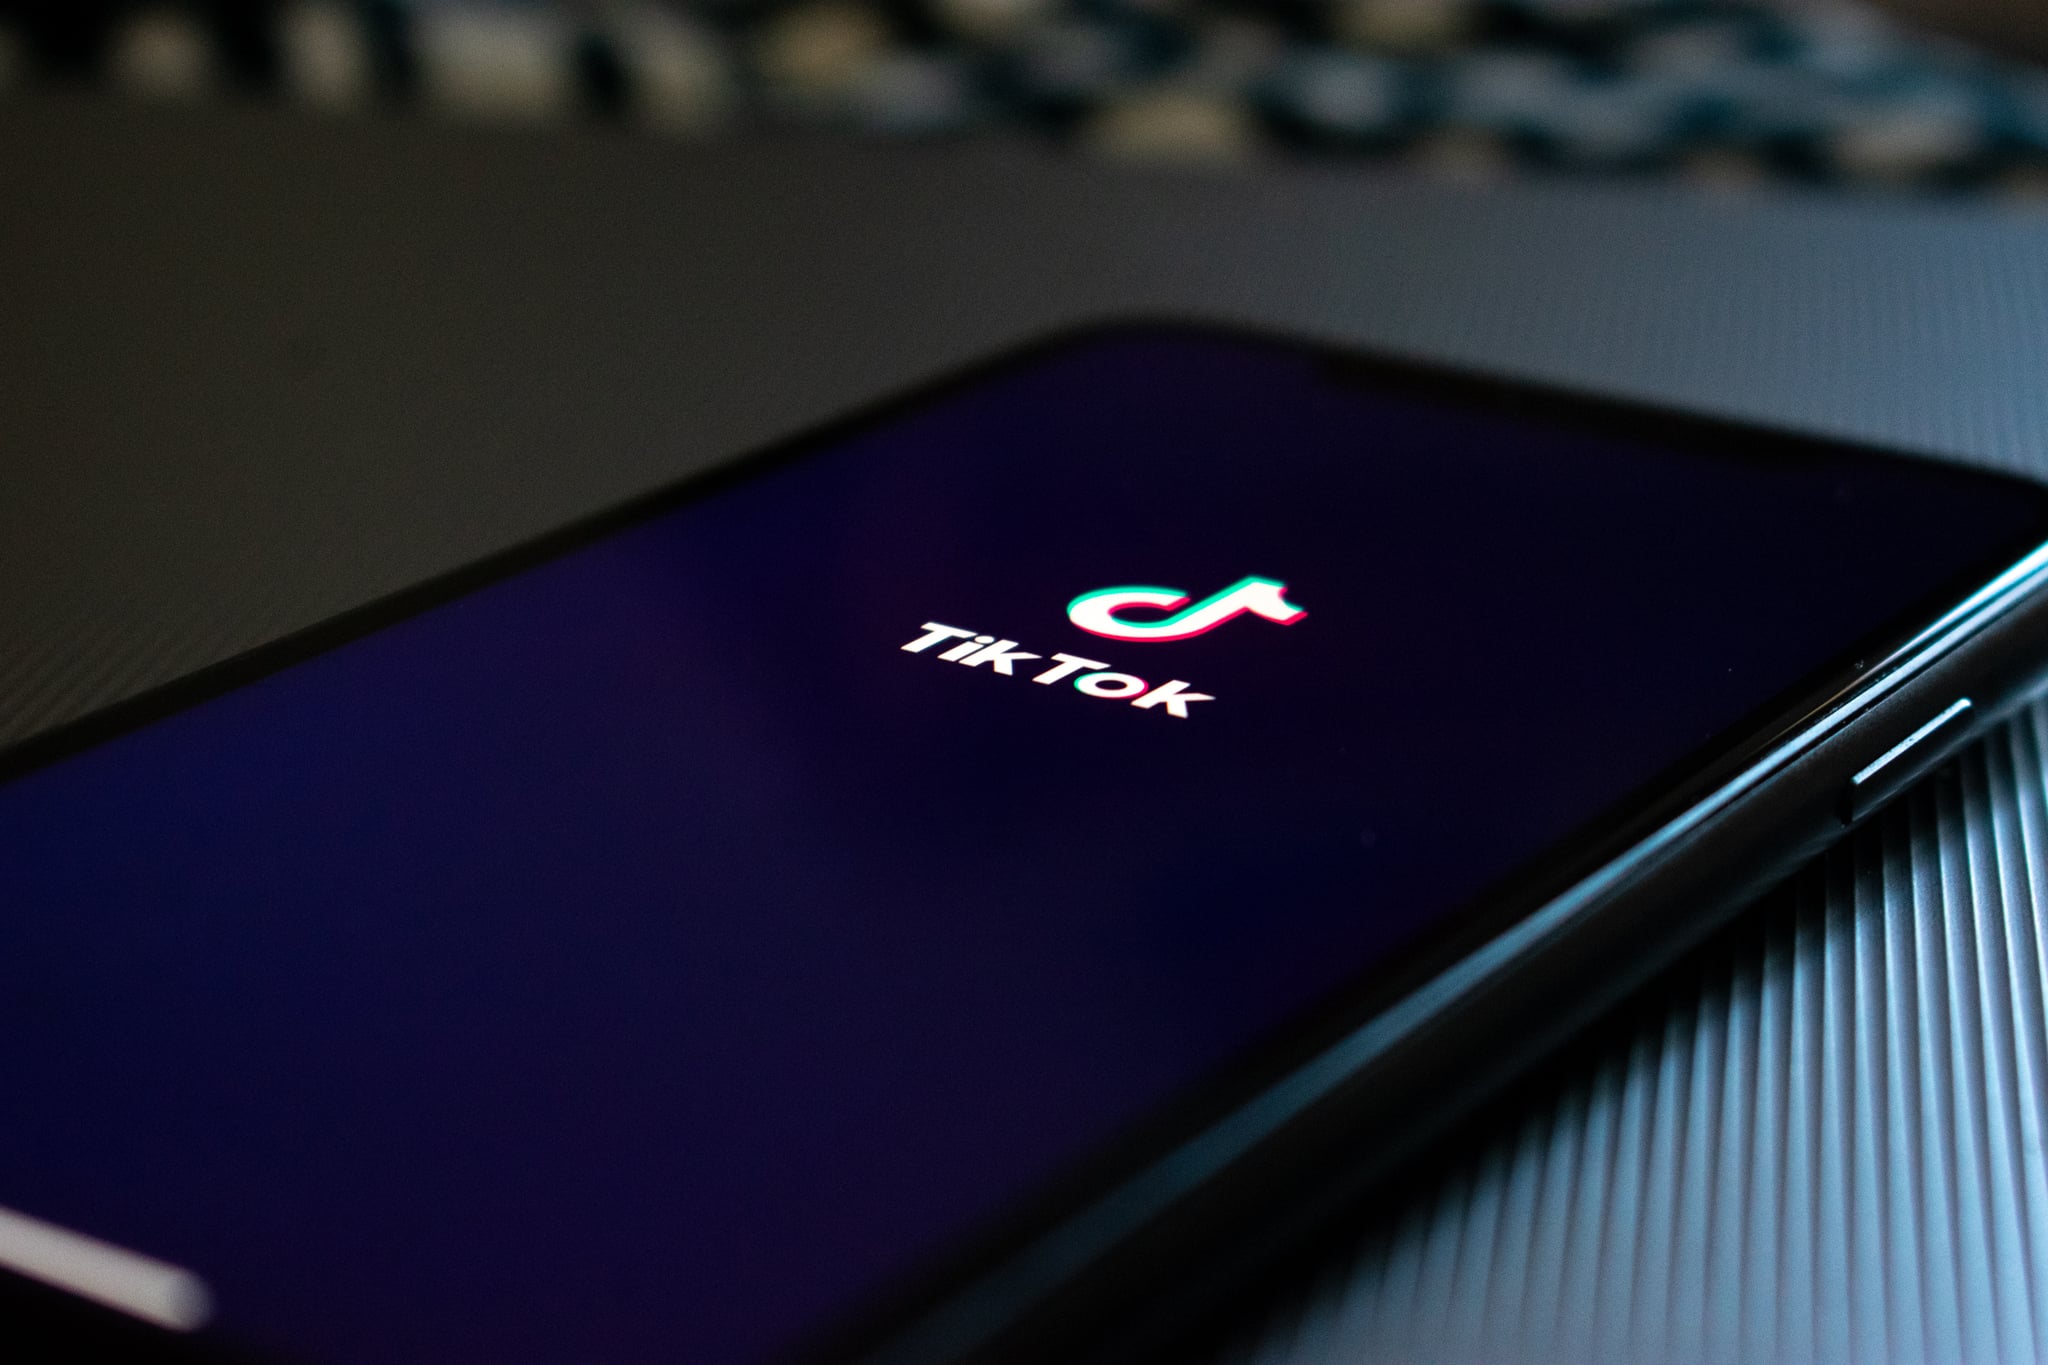 Will the U.S. impose sanctions on TikTok for allegedly violating children's privacy?